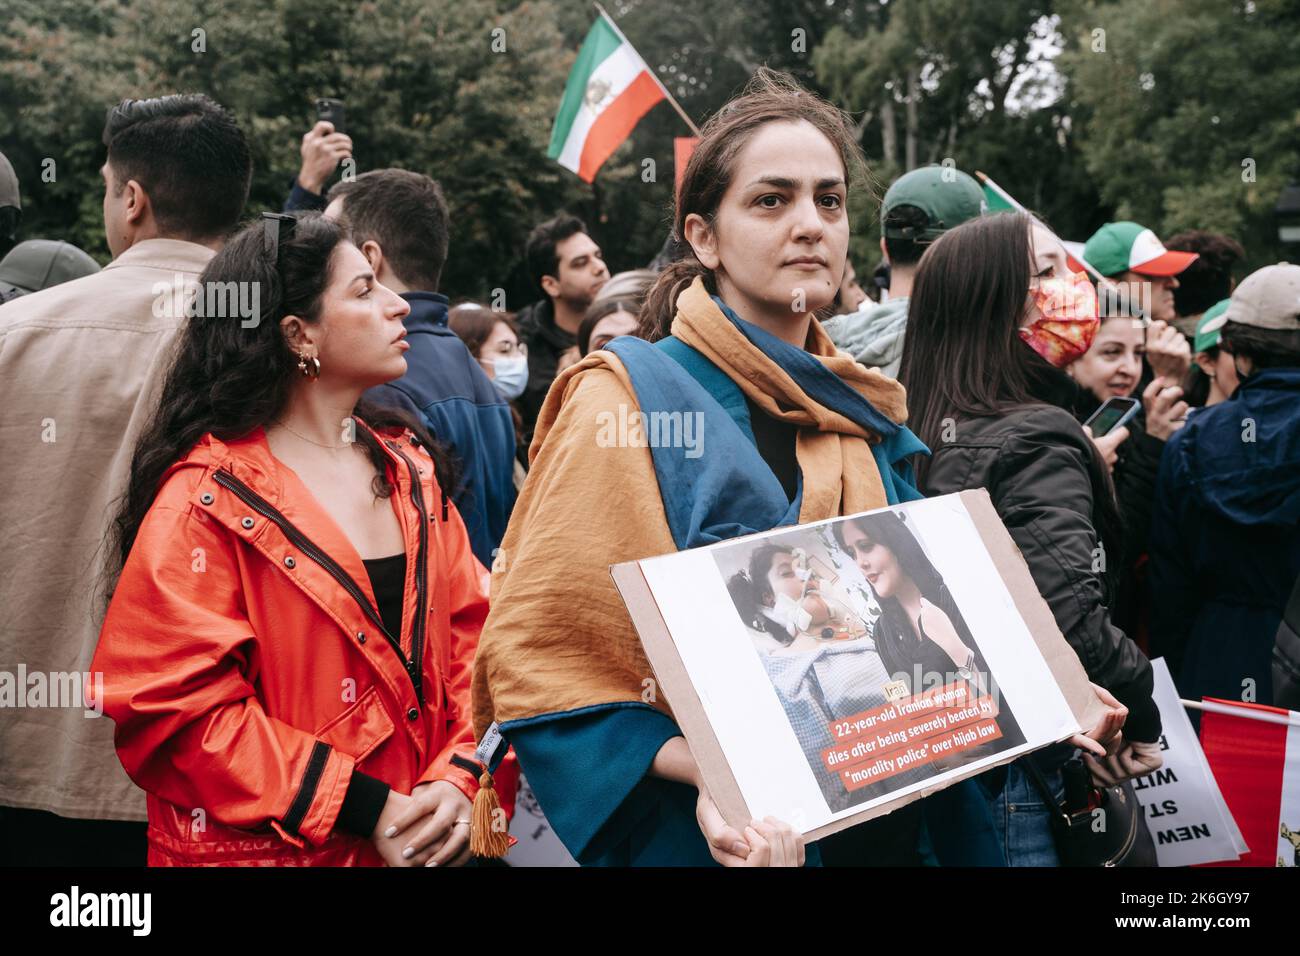 New York, United States. 01st Oct, 2022. A woman holds a protest sign dispalying two photos of Mahsa Ahmini side by side. In one photo, Mahsa Ahmini is smiling. In the other, she is intubated after being beaten by Iran's so-called morality police. An Iranian flag is seen in the background. Woman, Life, Freedom protest against Iran's hardline Islamic regime held in New York. Protests broke out after Mahsa Amini's death in the custody of Iran's so-called moral police. Credit: SOPA Images Limited/Alamy Live News Stock Photo